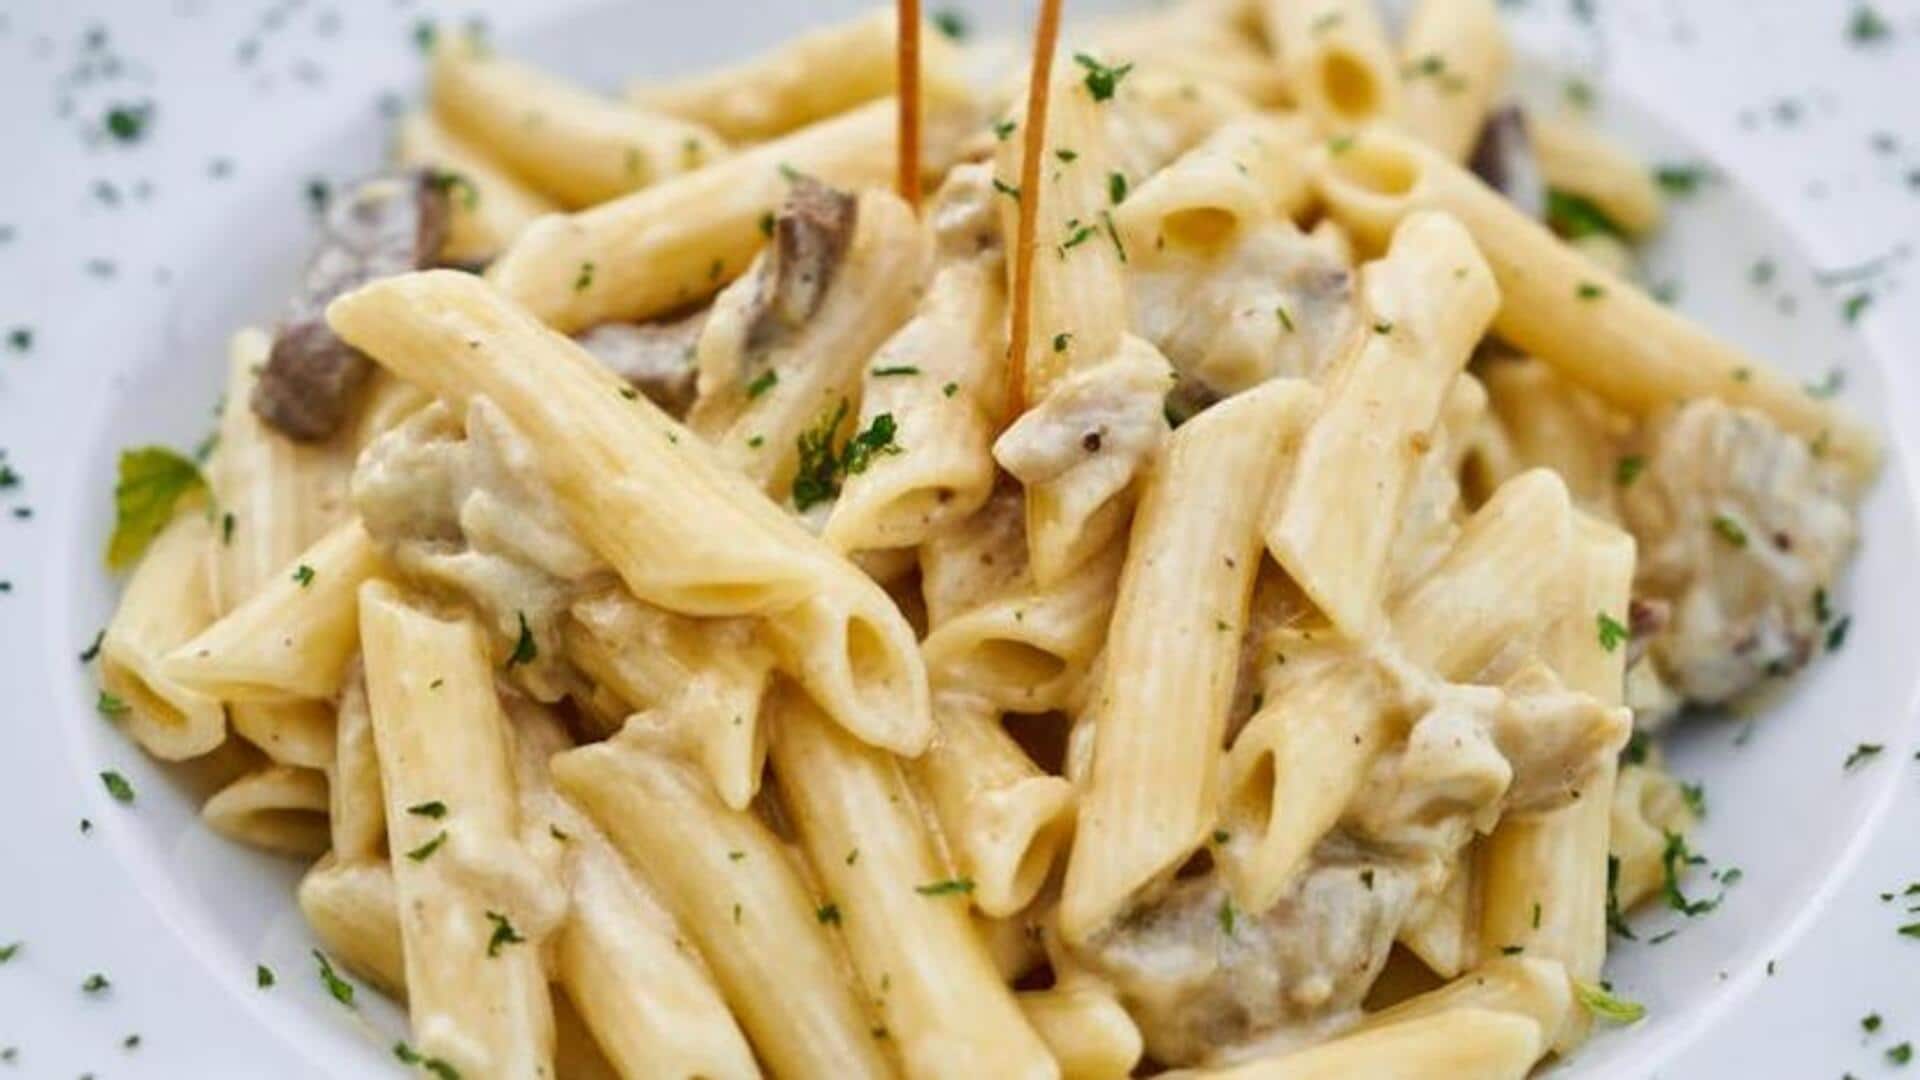 Impress your guests with this creamy cauliflower Alfredo pasta recipe